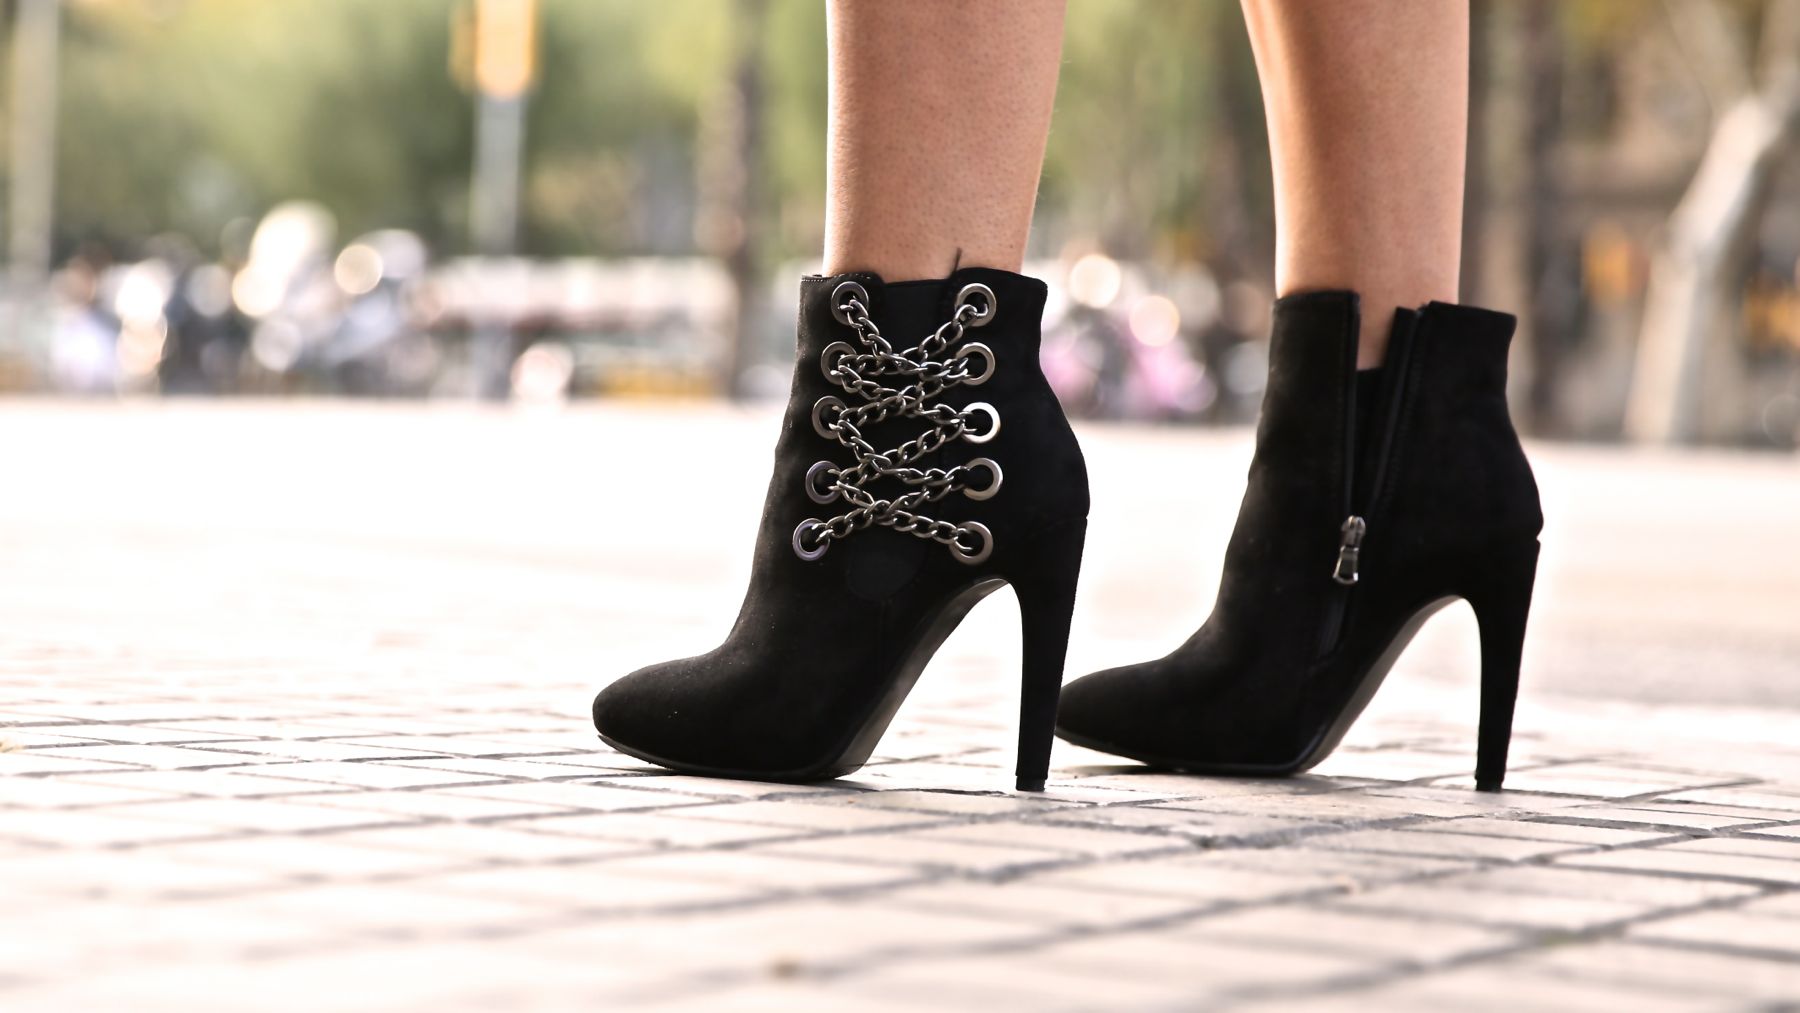 Chic rocky look, leather and chain boots